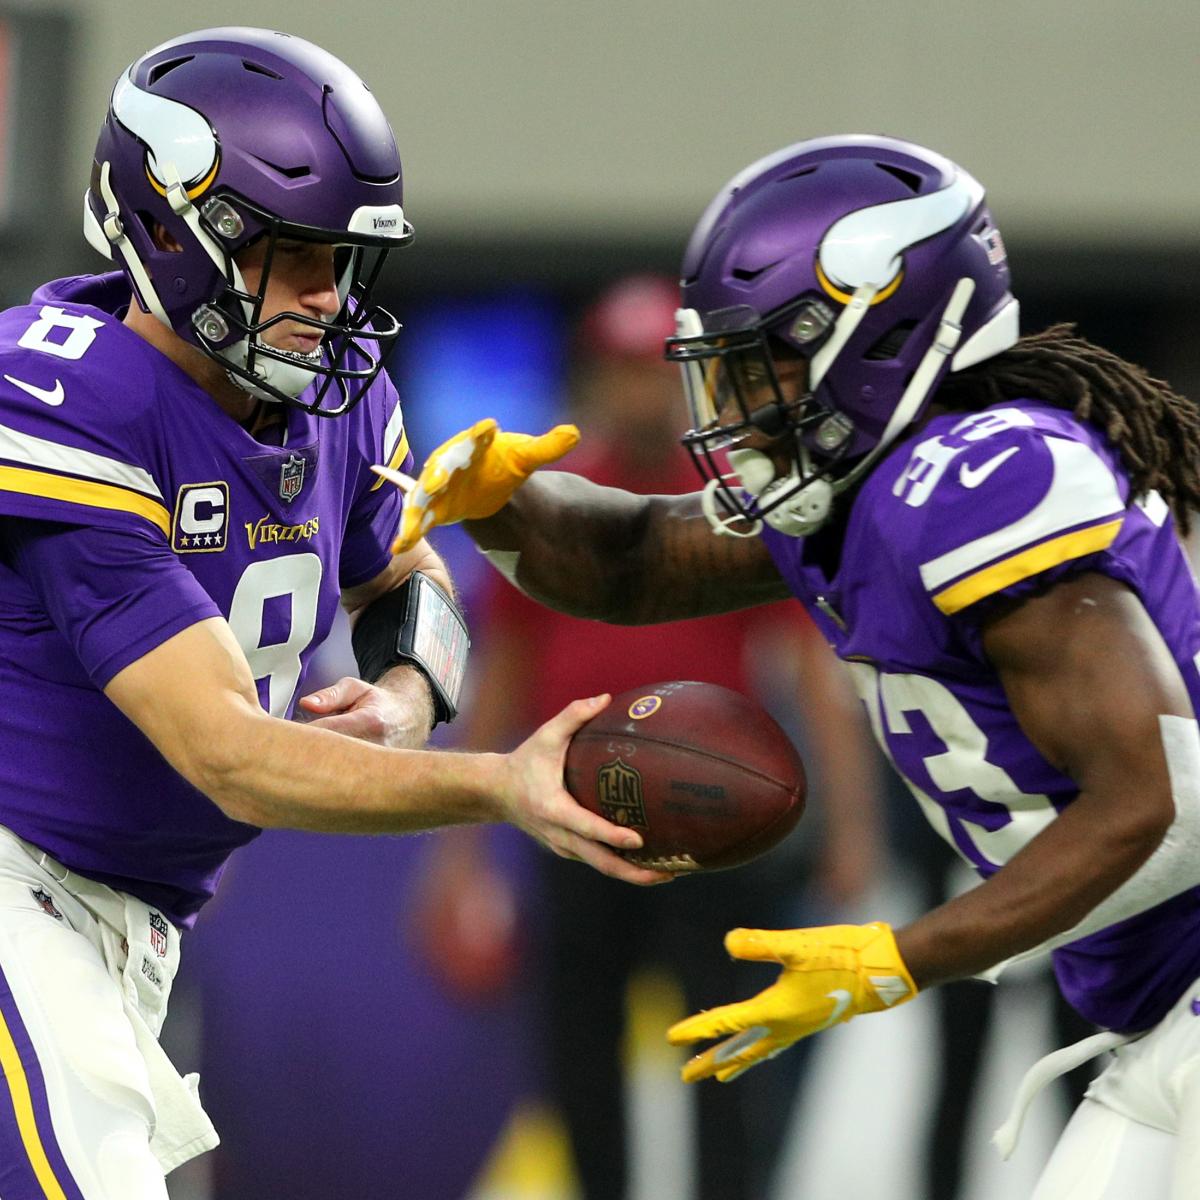 2020 Minnesota Vikings Schedule: Full Listing of Dates, Times and TV